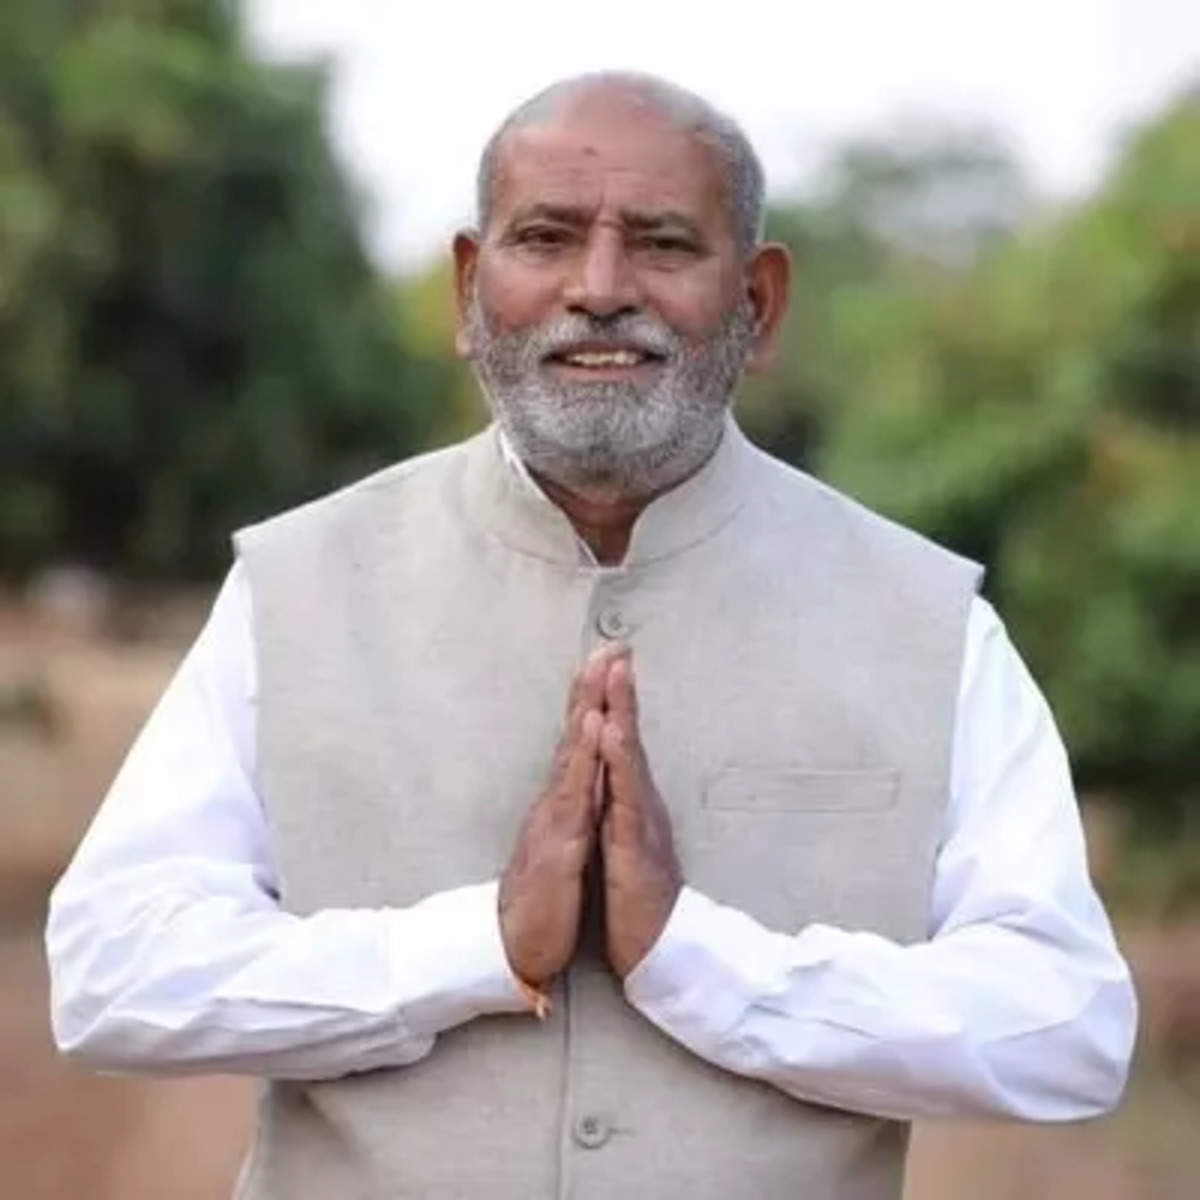 #BREAKING: SANGANNA KARADI EFFECT; SETBACK FOR THE BJP in #Koppala ahead of #LokSabhaElections2024 📌More than 50 BJP activists Quit the BJP Party and joined Congress under the leadership of former MP Sanganna Kardi and MLA Raghavendra Hitnal in various villages of the Koppala